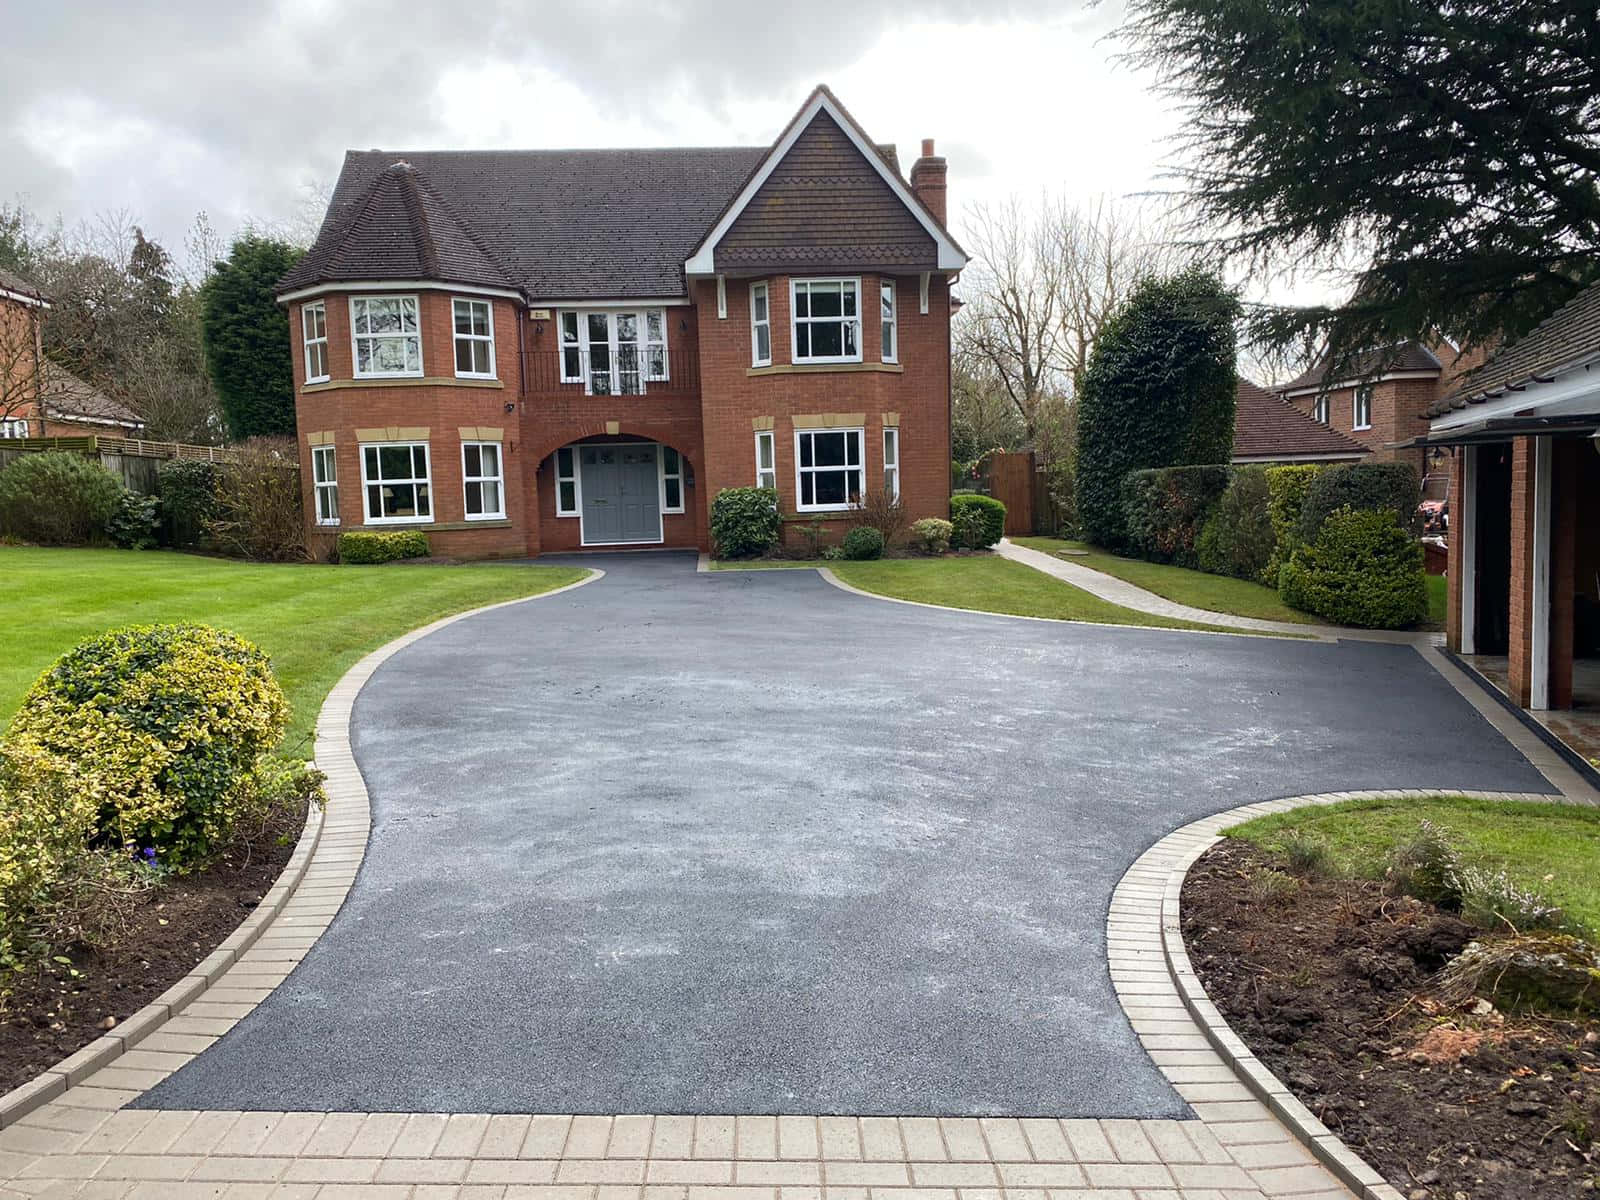 Get Inspired With These Attractive Driveway Ideas